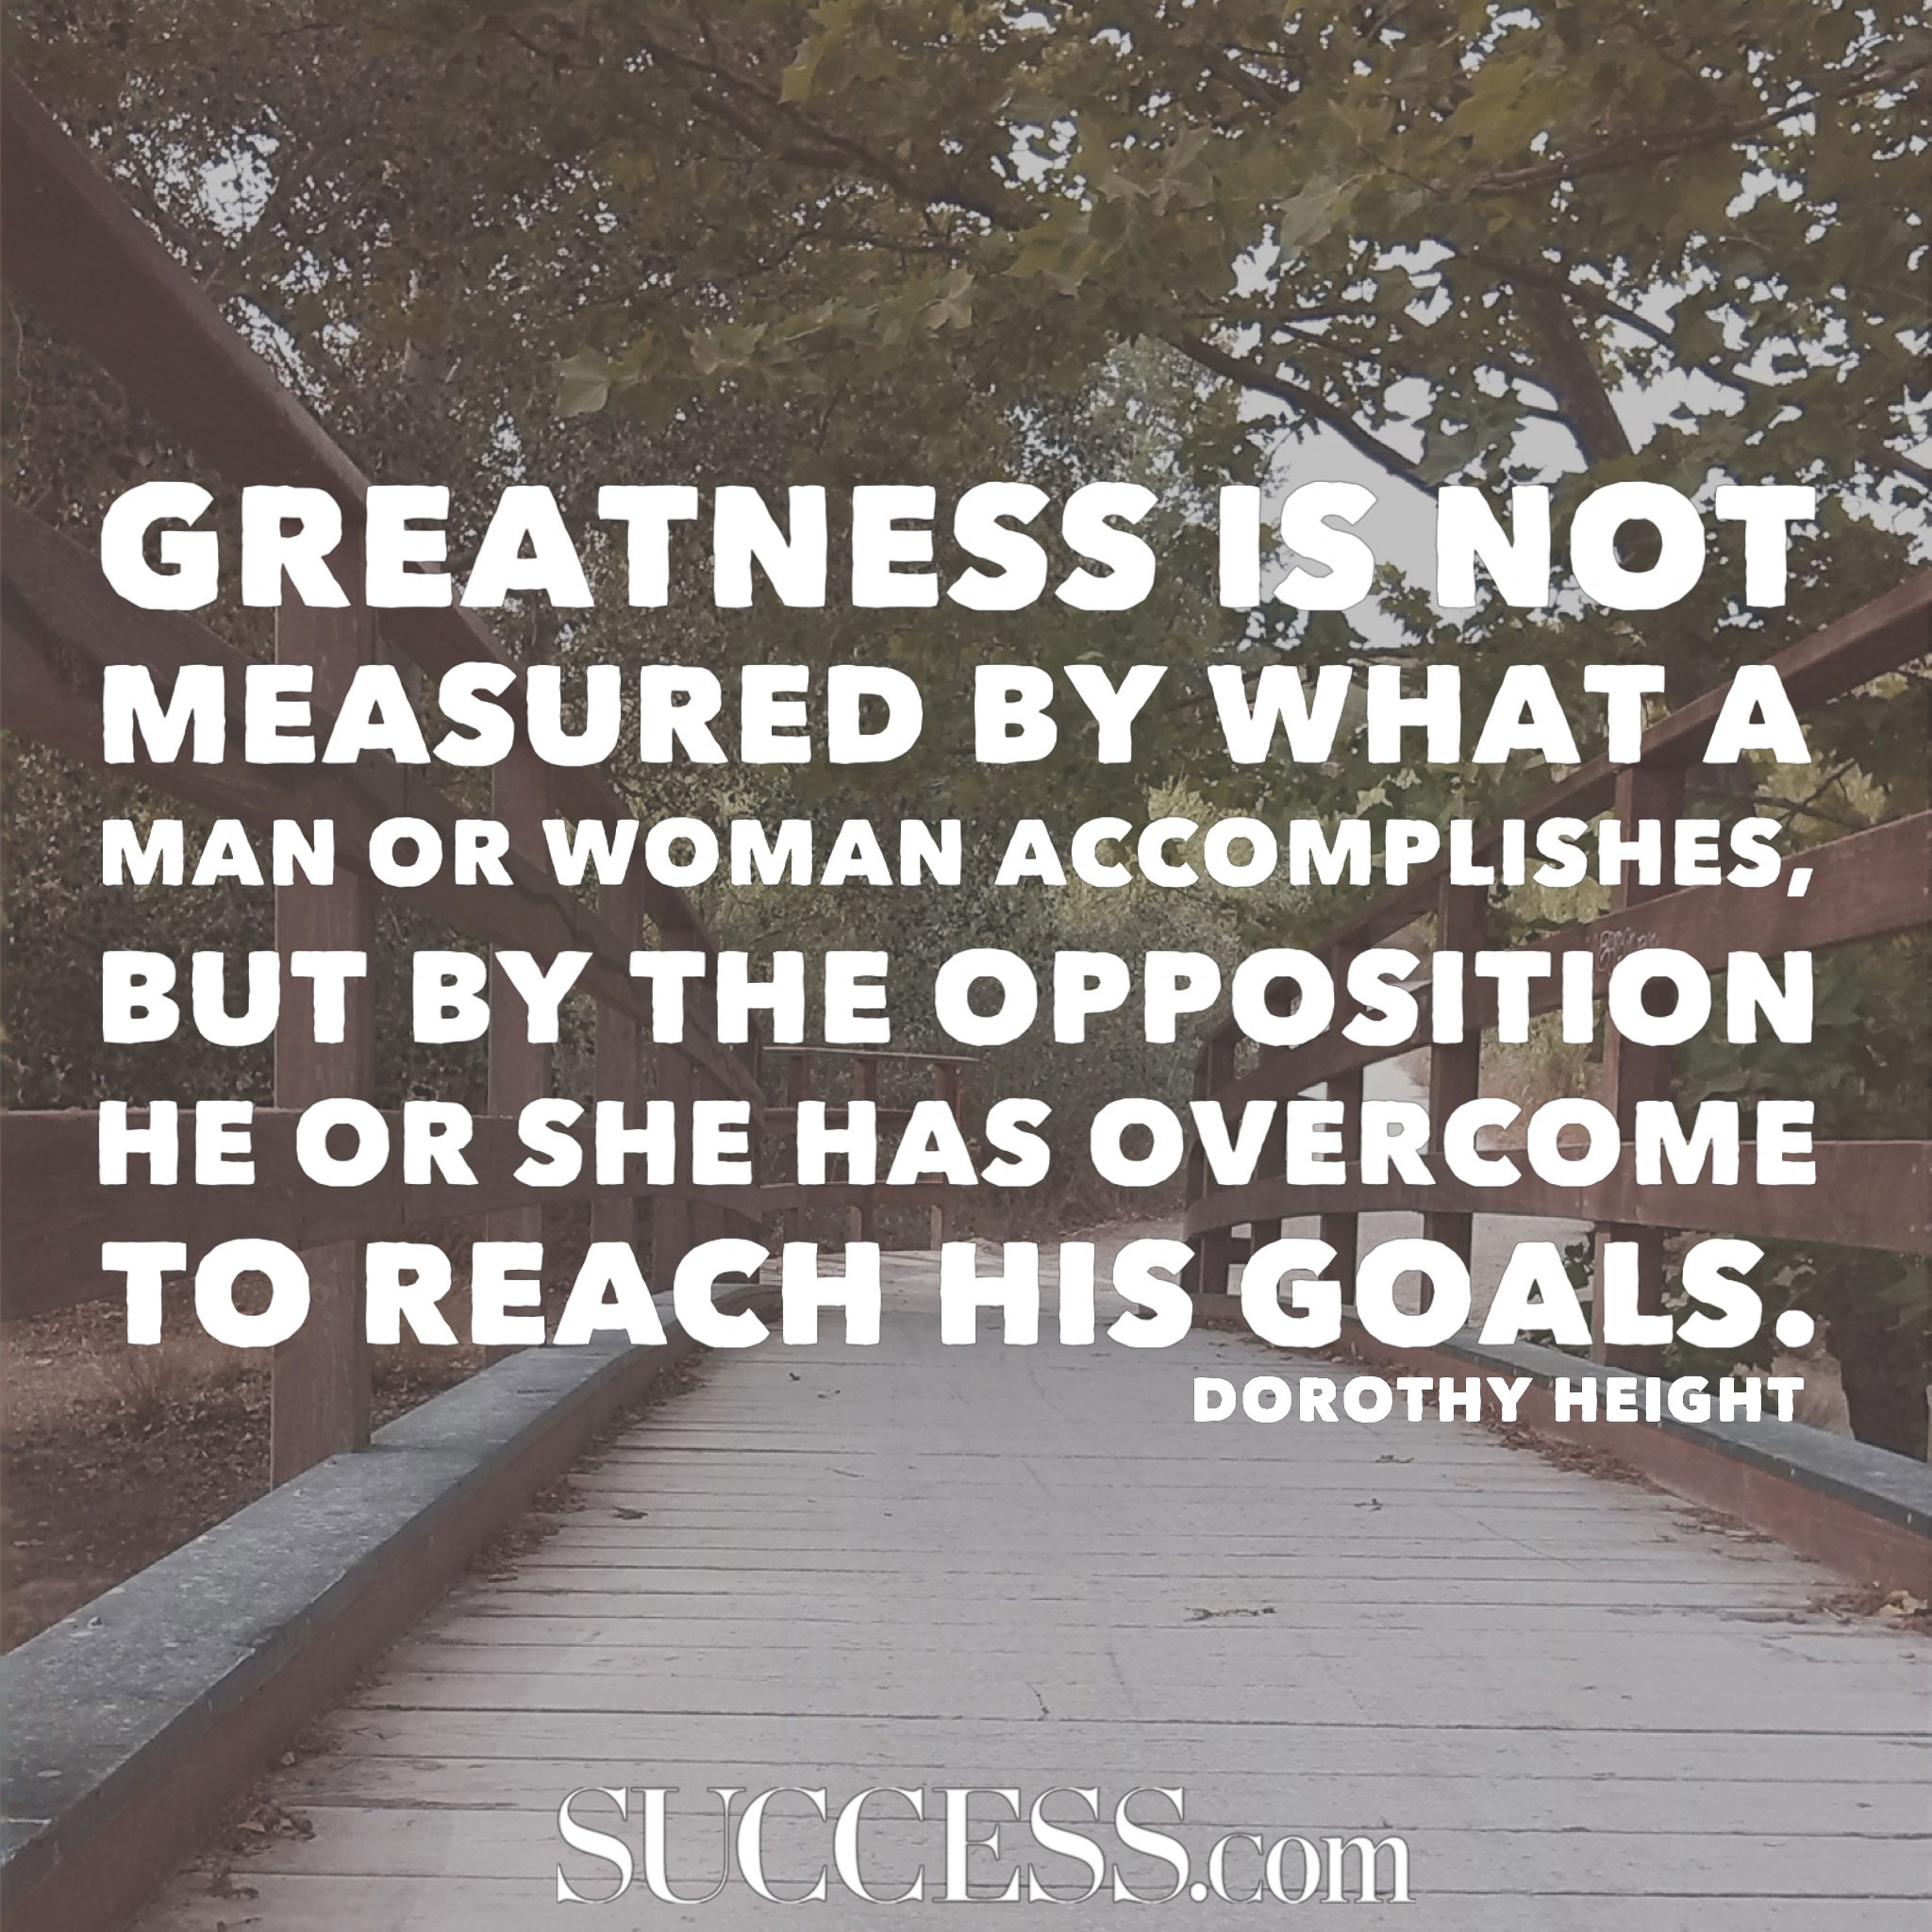 19 Powerful Quotes to Inspire Greatness - SUCCESS